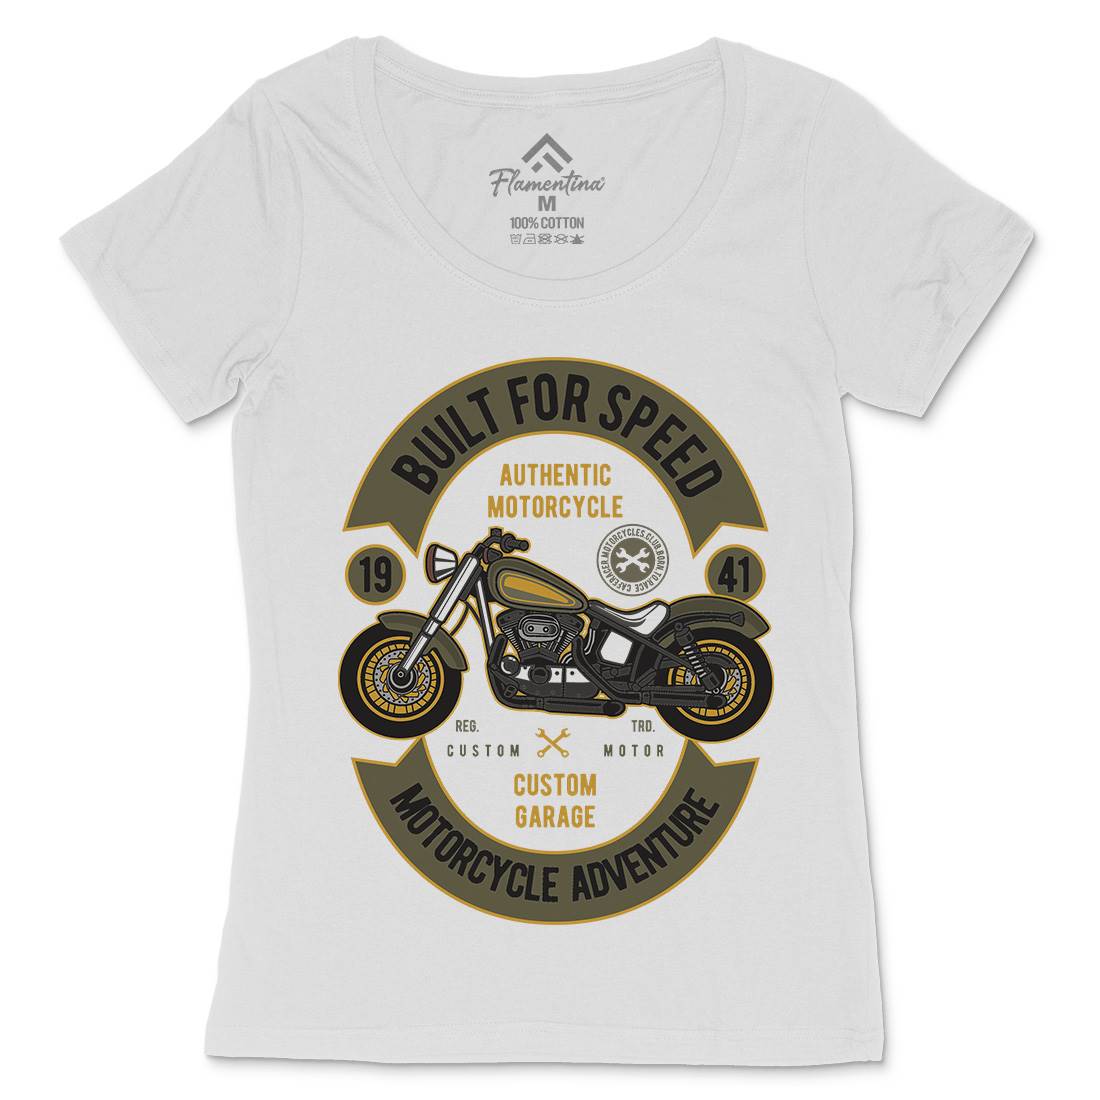 Built For Speed Womens Scoop Neck T-Shirt Motorcycles D512